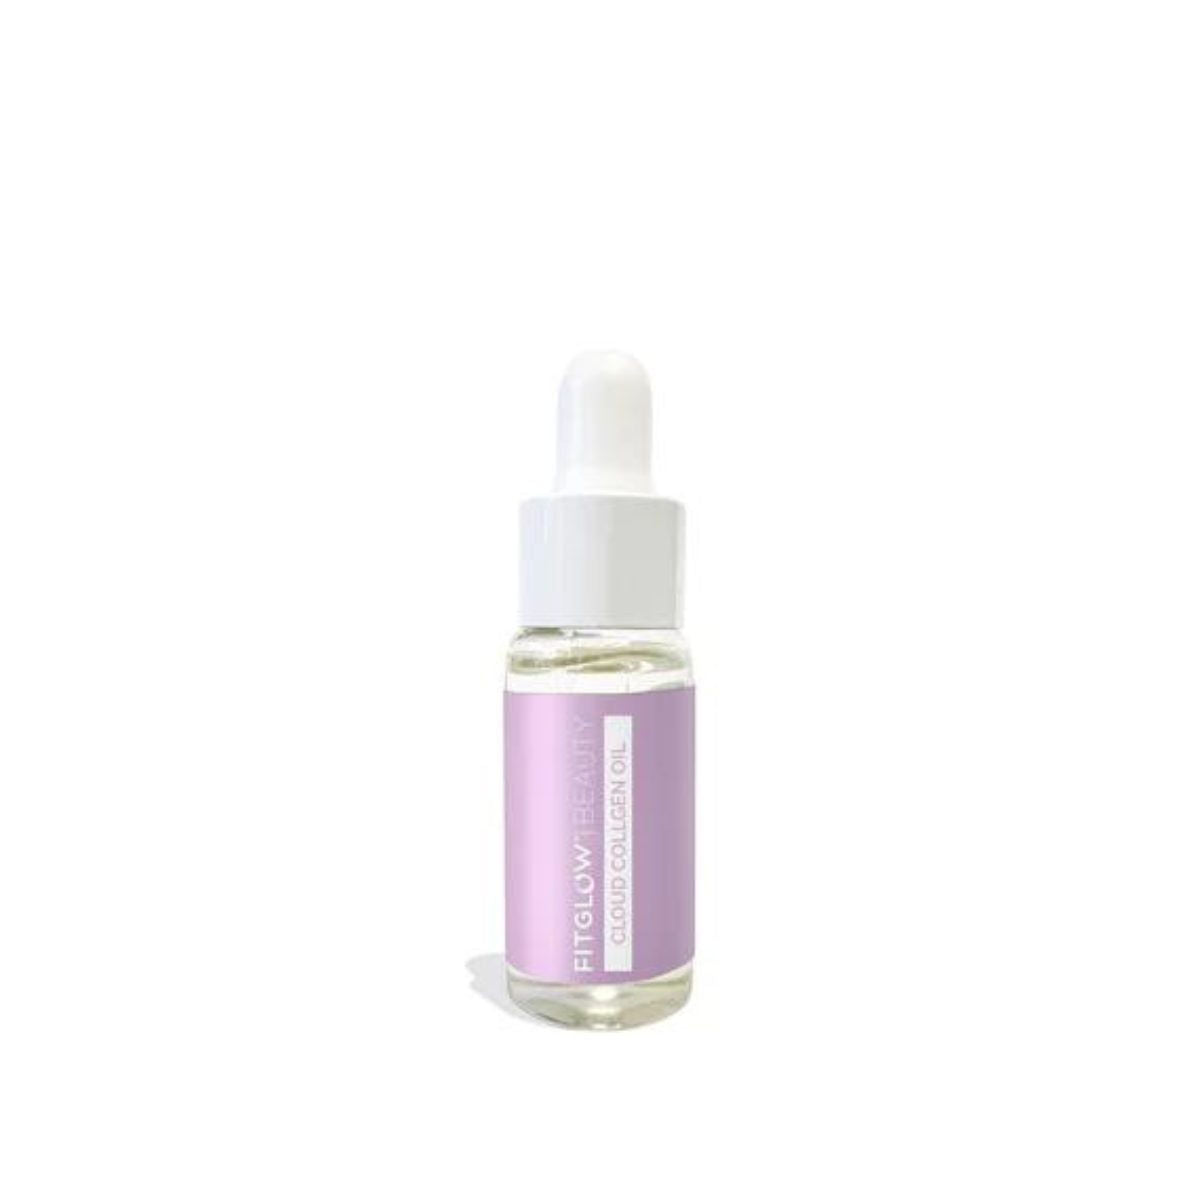 Fitglow Beauty Cloud Collagen Oil - 5mL Trial and Travel Size